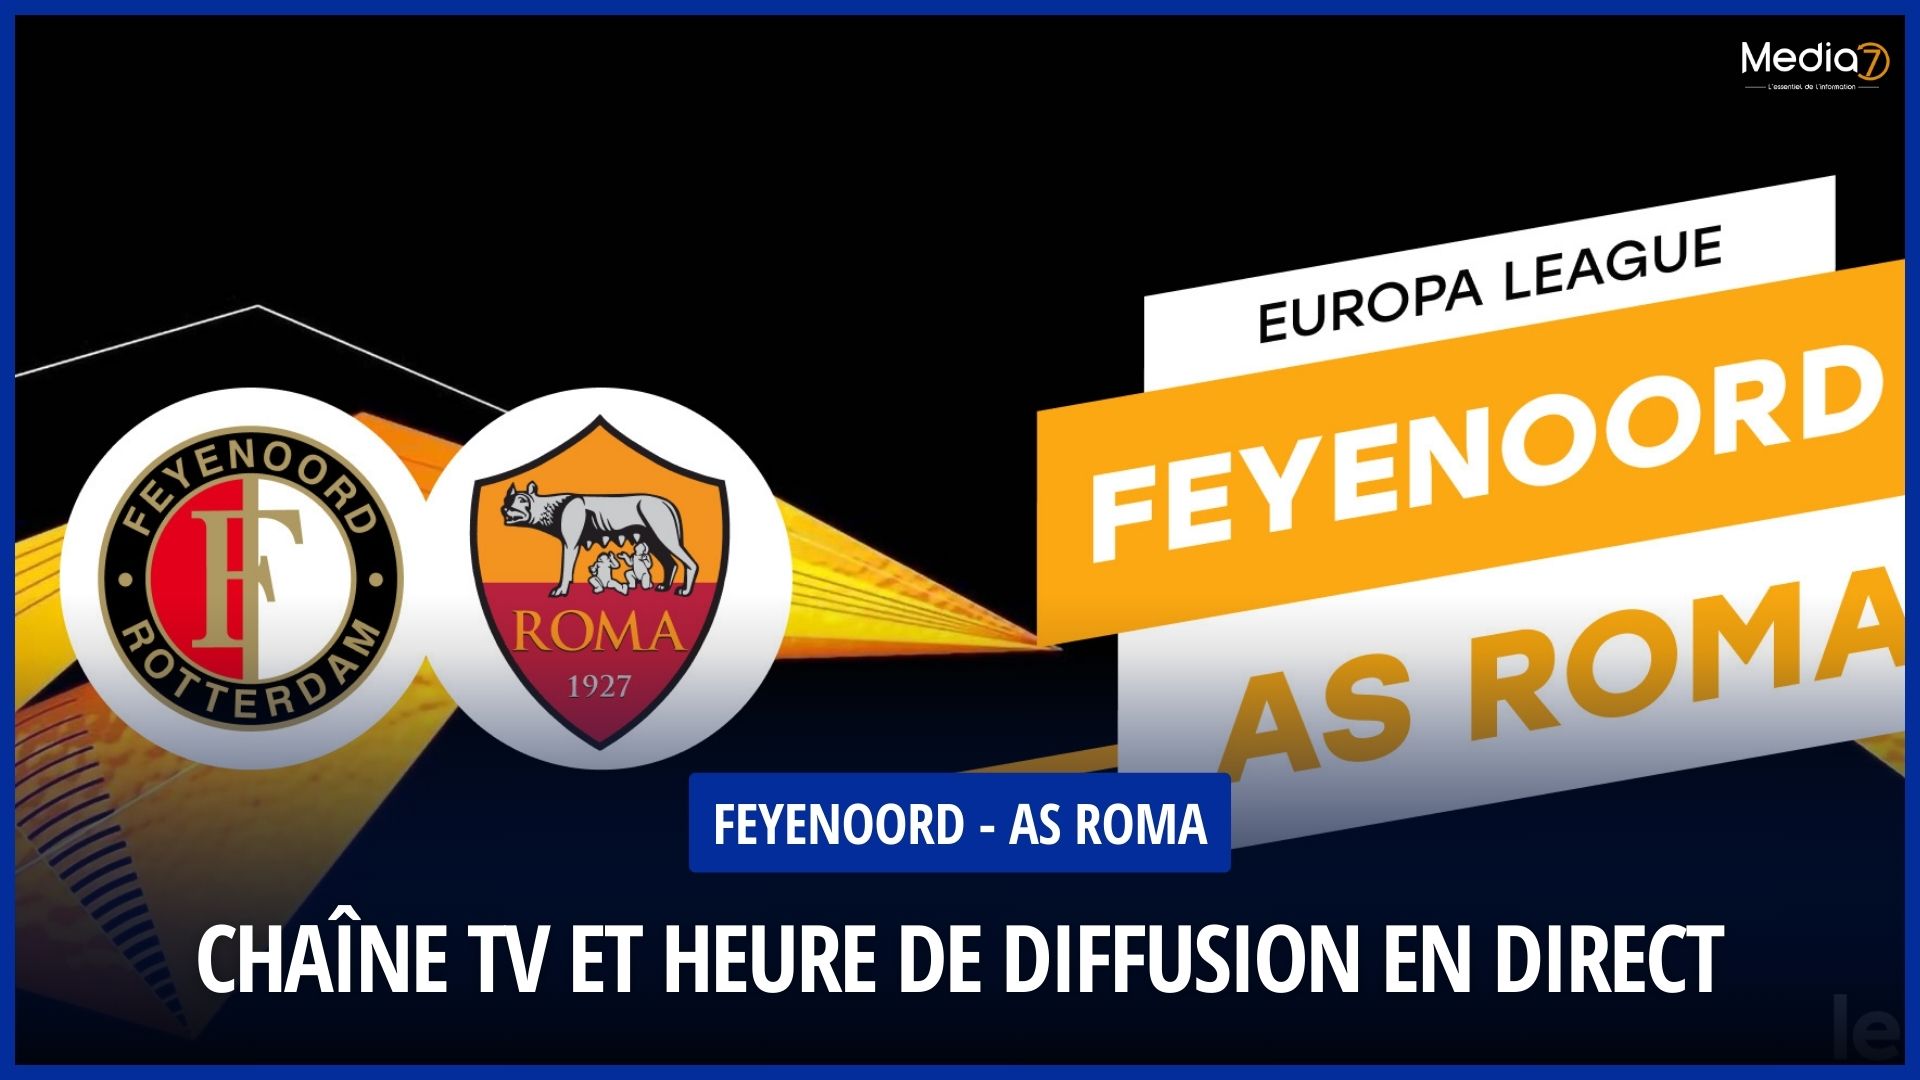 Match Feyenoord - AS Roma Live: TV Channel and Broadcast Times - Media7